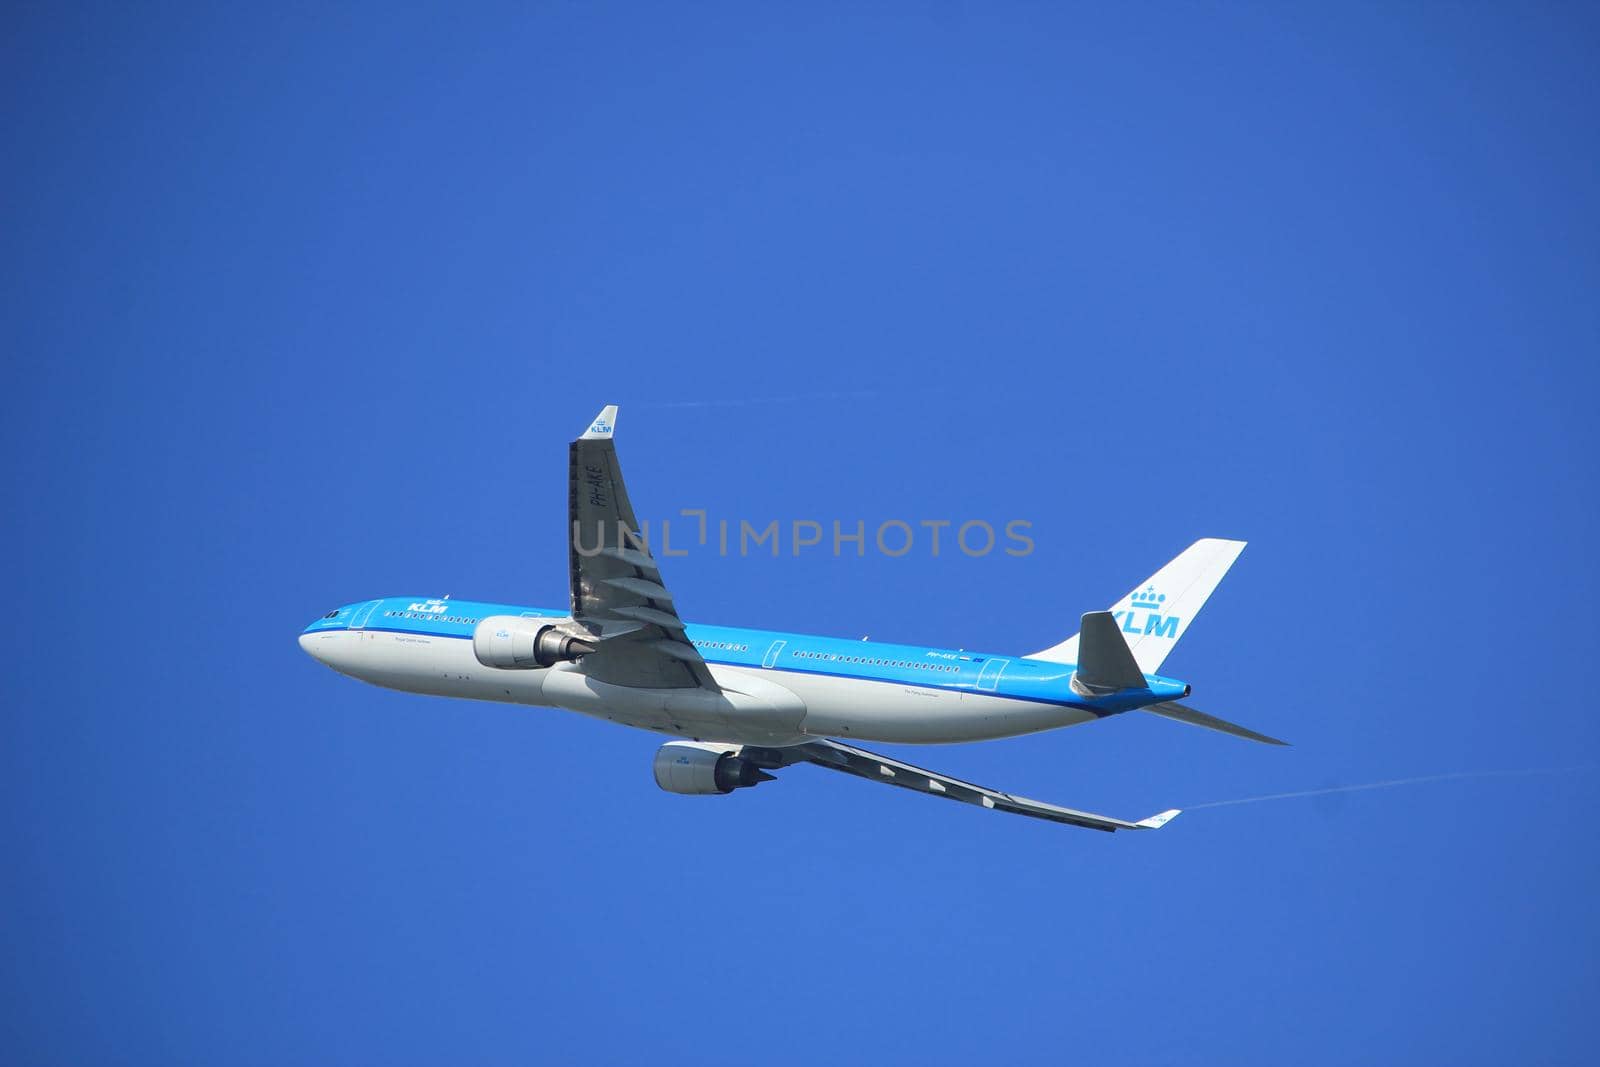 Amsterdam the Netherlands - September 23rd 2017: PH-AKE KLM Royal Dutch Airlines Airbus A330 takeoff from Kaagbaan runway, Amsterdam Airport Schiphol